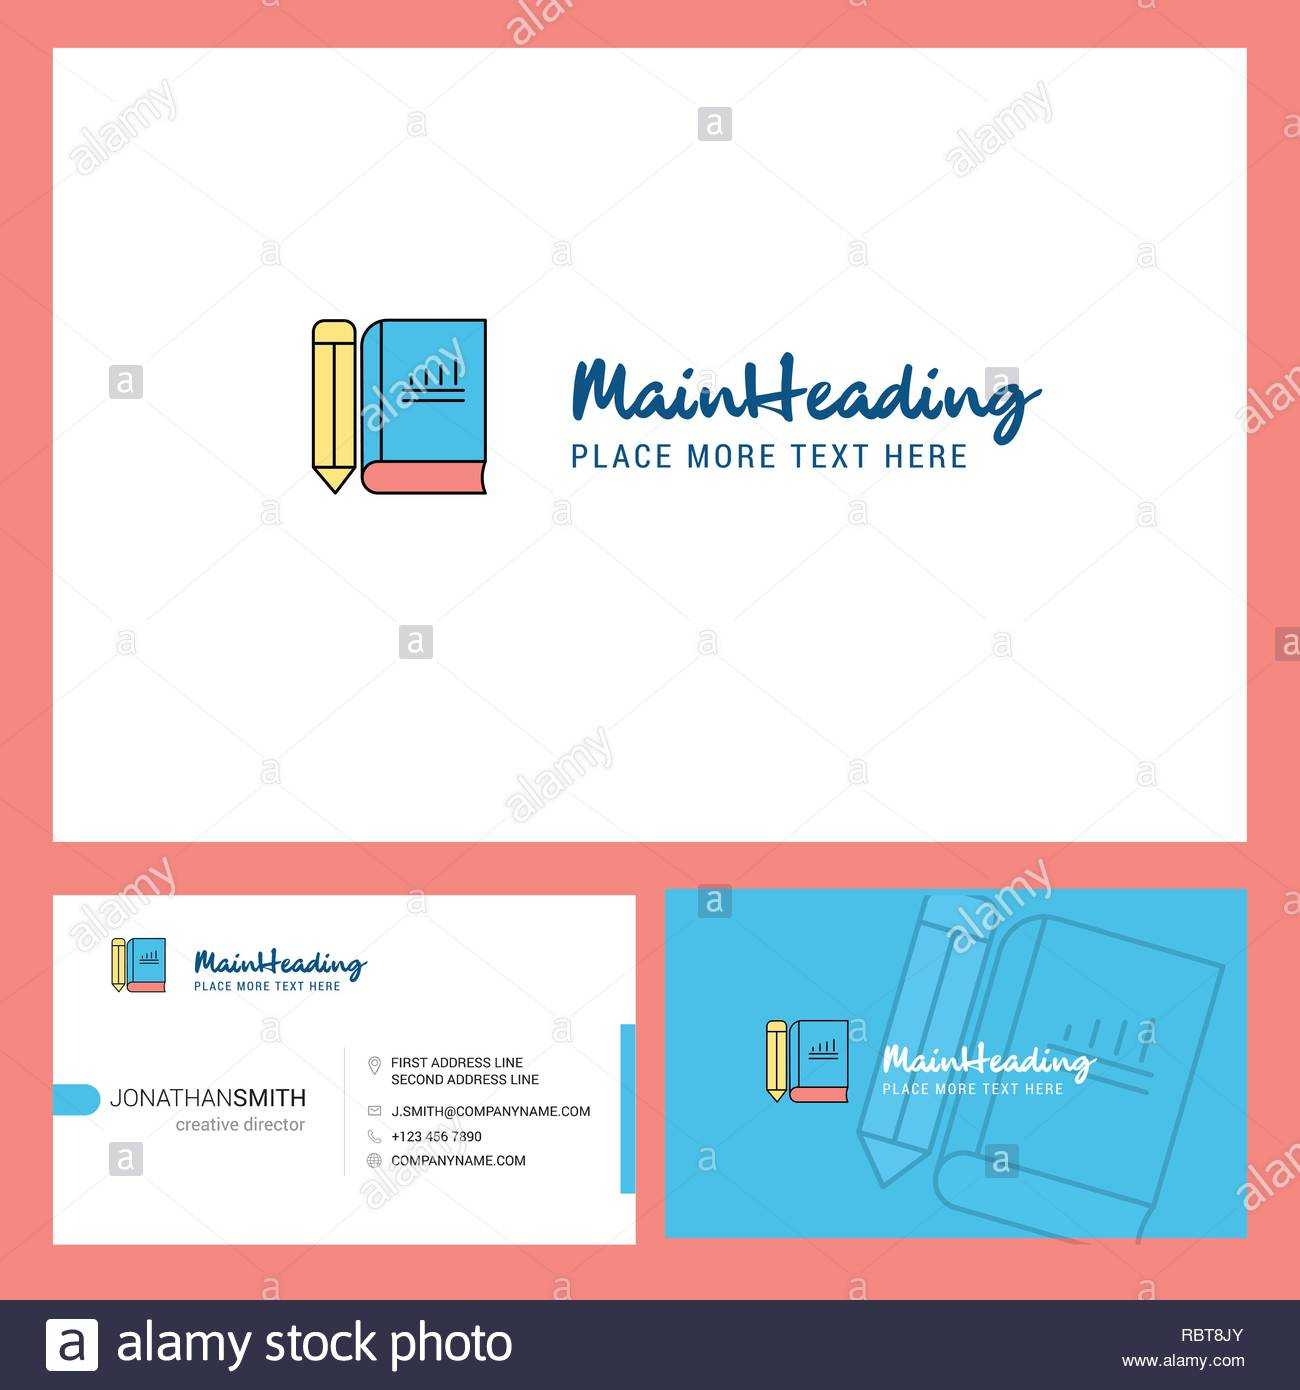 Book And Pencil Logo Design With Tagline & Front And Back Within Dominion Card Template